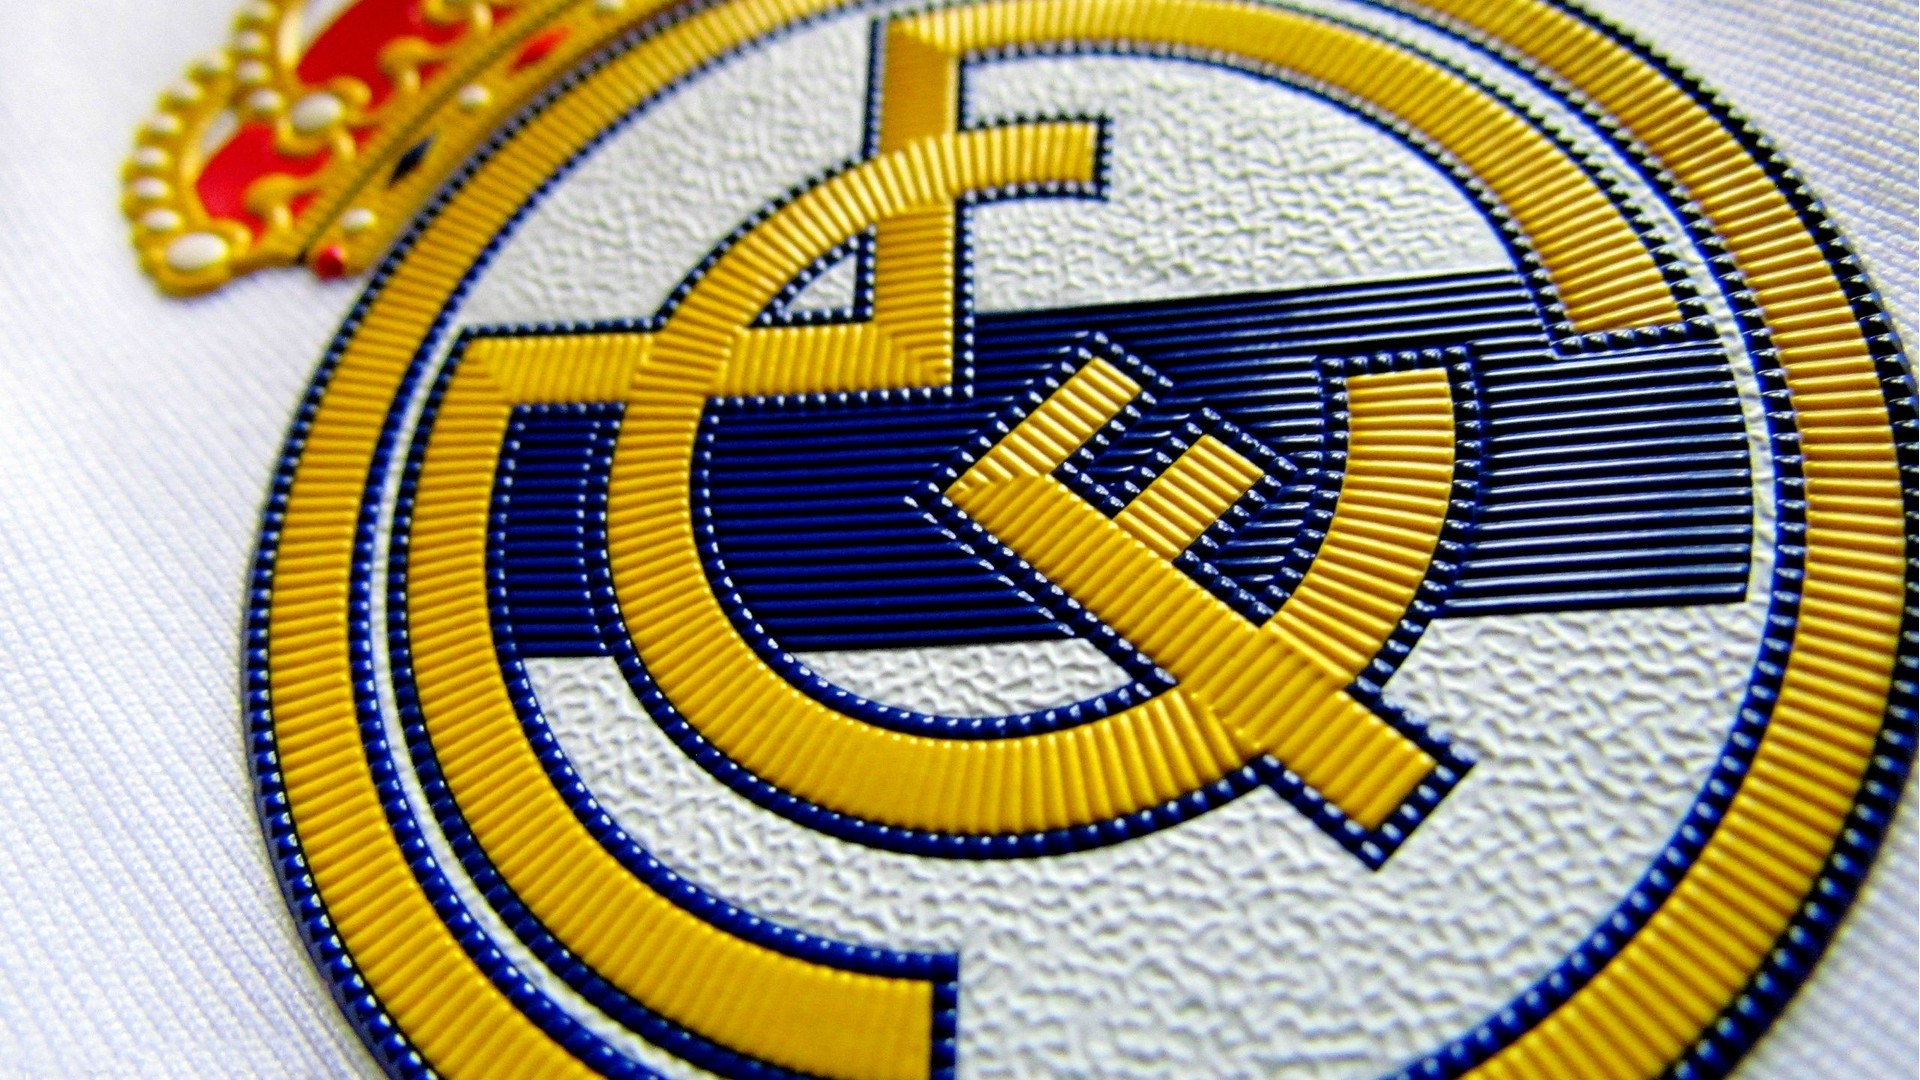 Wallpapers HD Real Madrid CF with resolution 1920x1080 pixel. You can make this wallpaper for your Mac or Windows Desktop Background, iPhone, Android or Tablet and another Smartphone device